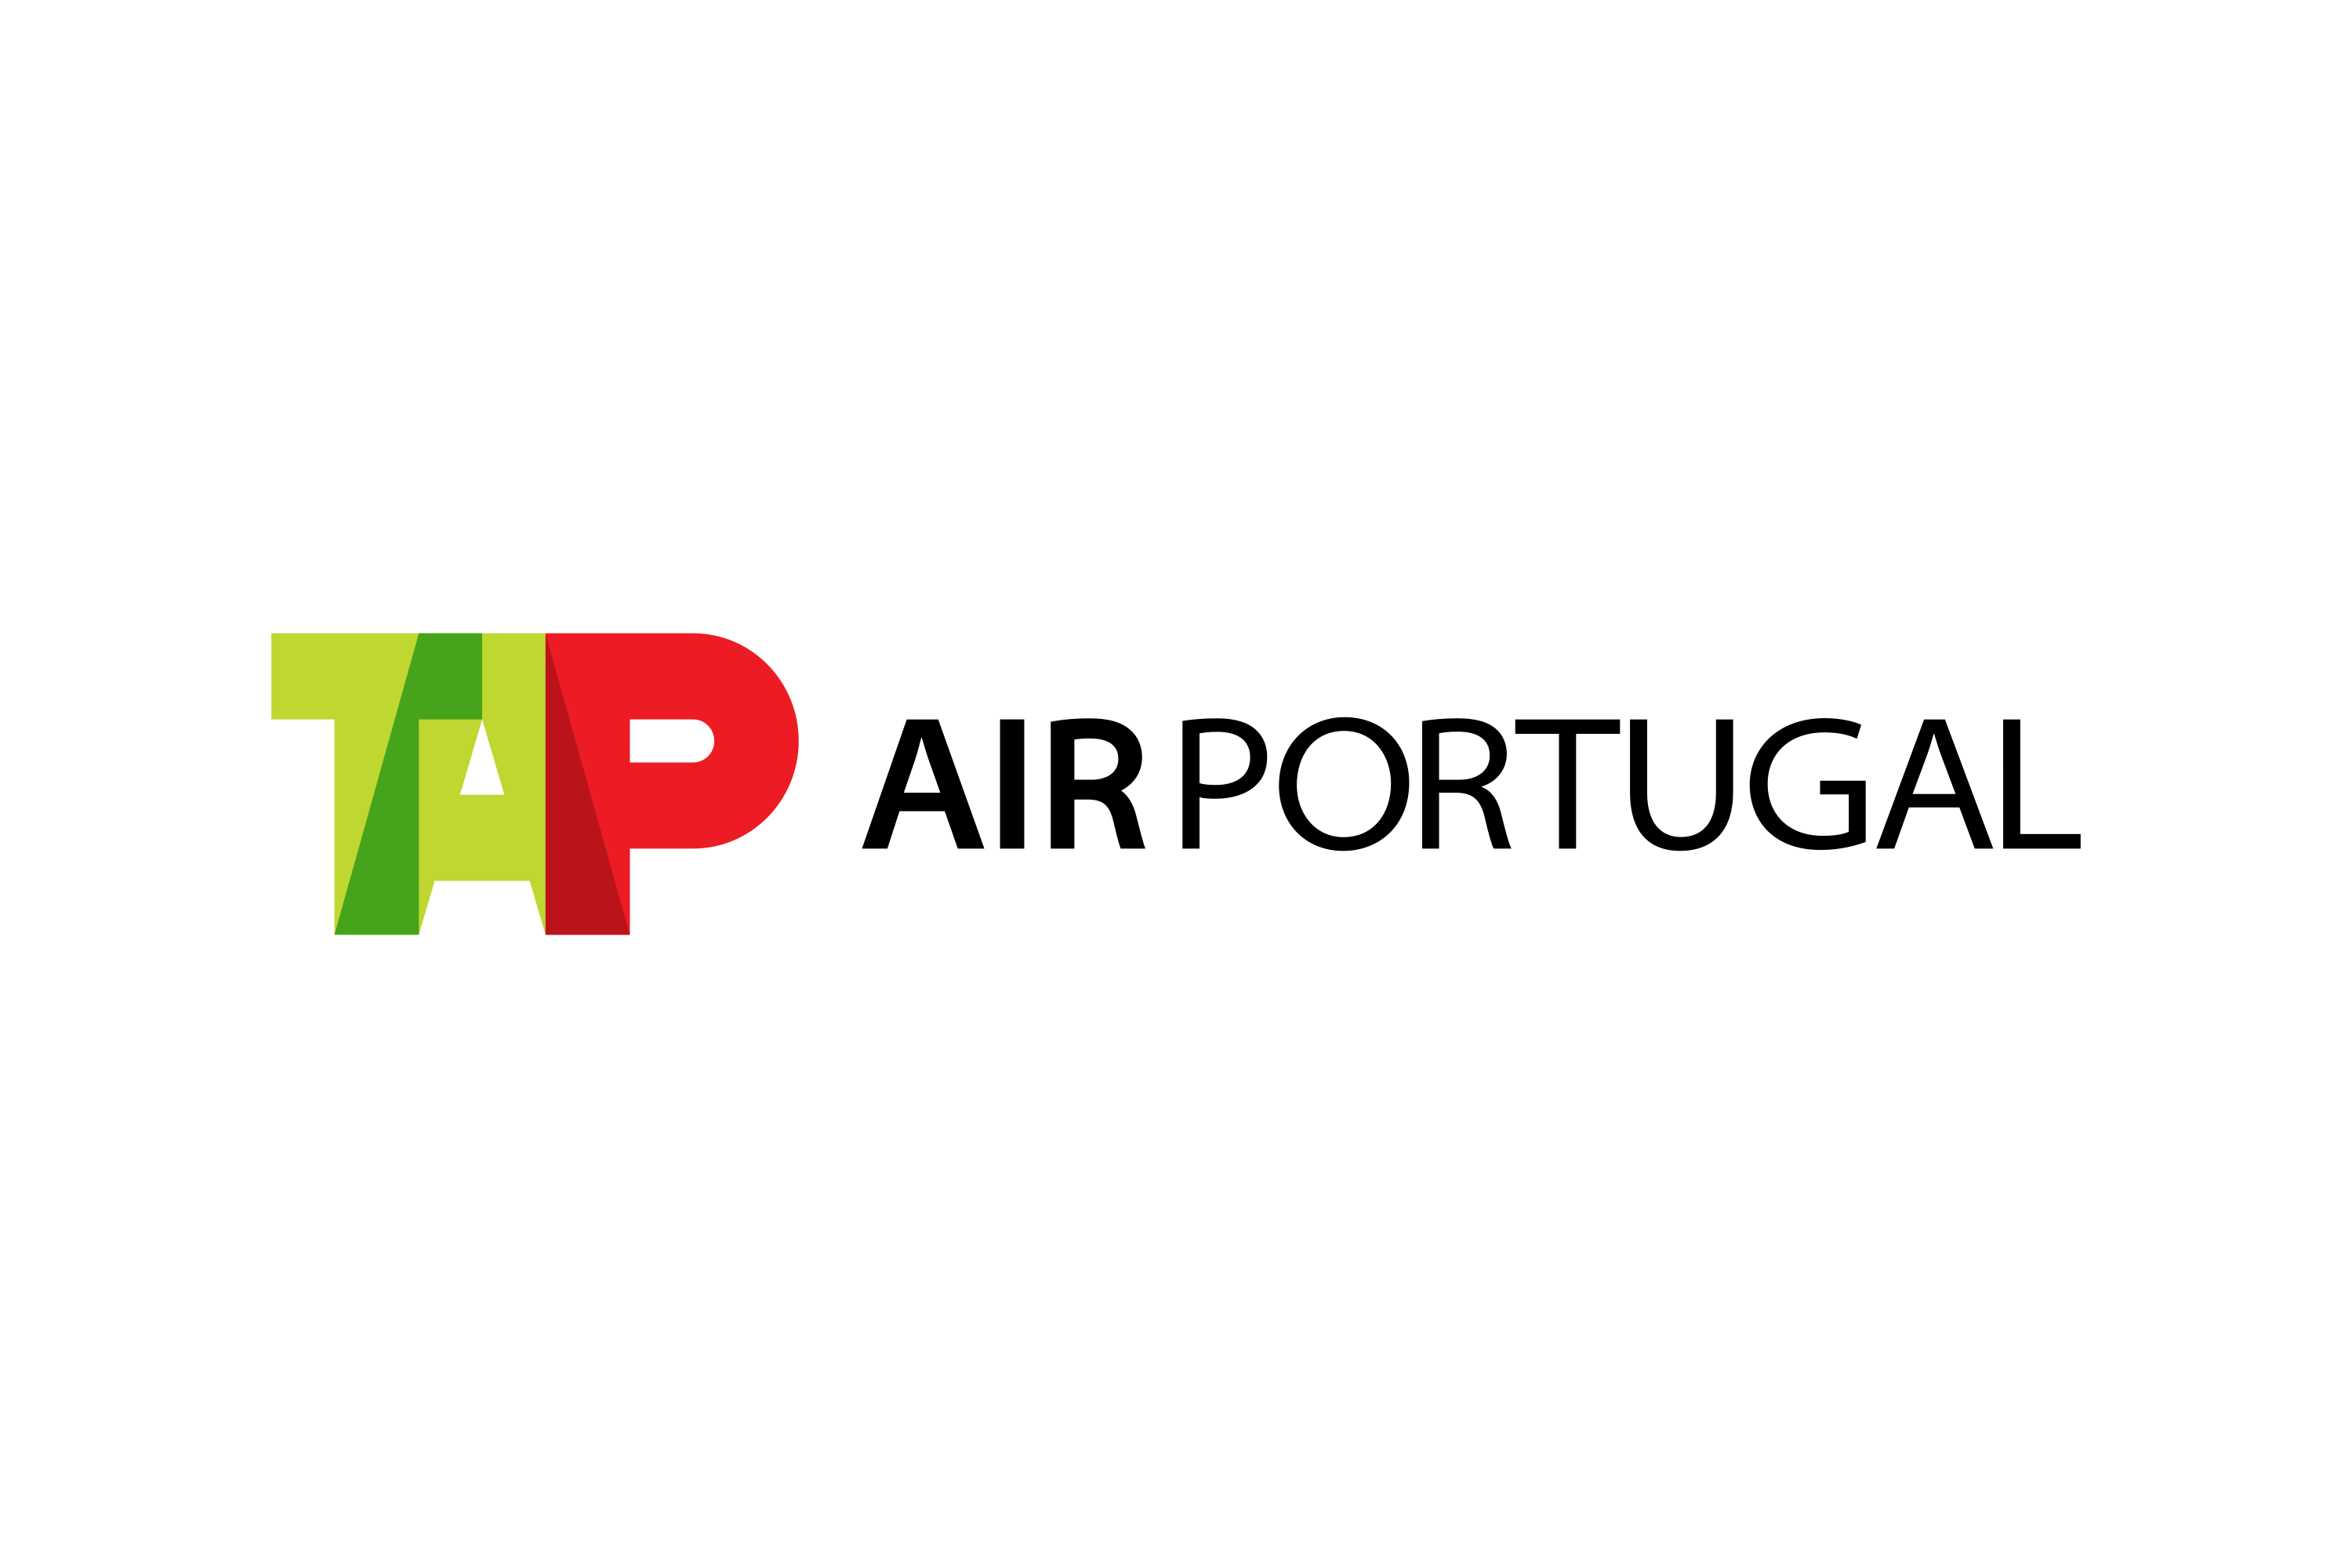 Download TAP Air Portugal Logo in SVG Vector or PNG File Format - Logo.wine